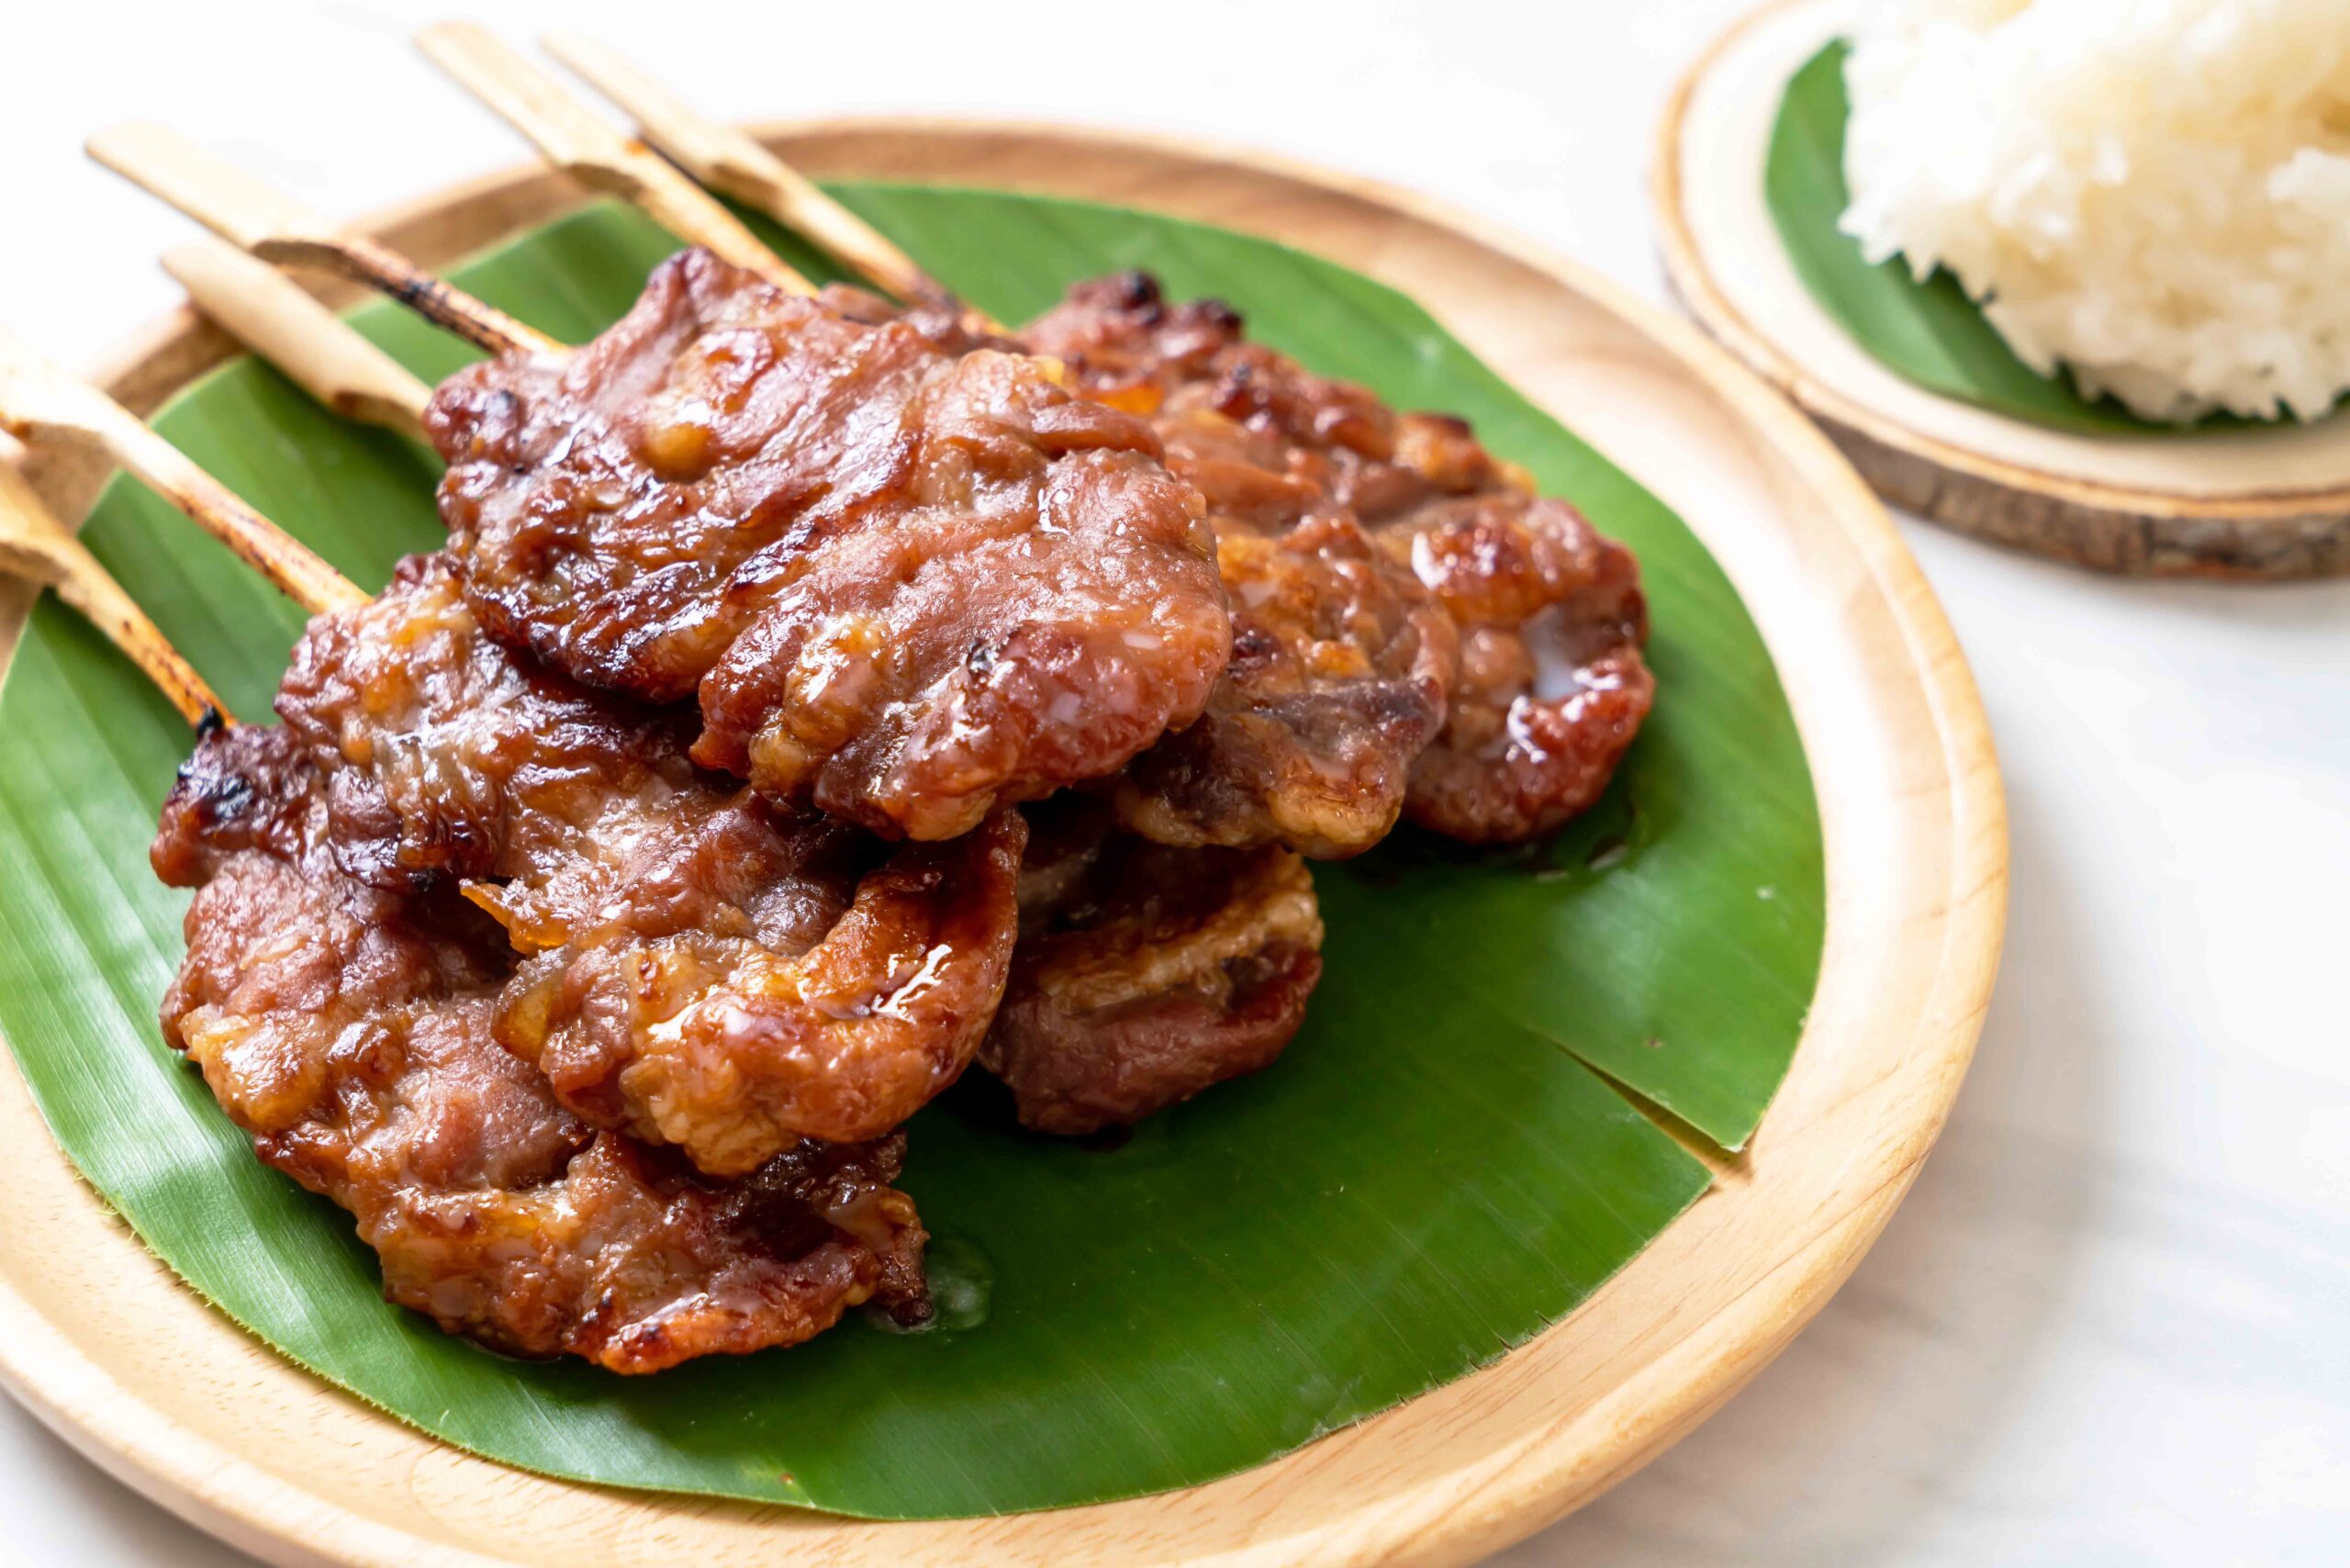 2. Grilled Pork with Sticky Rice